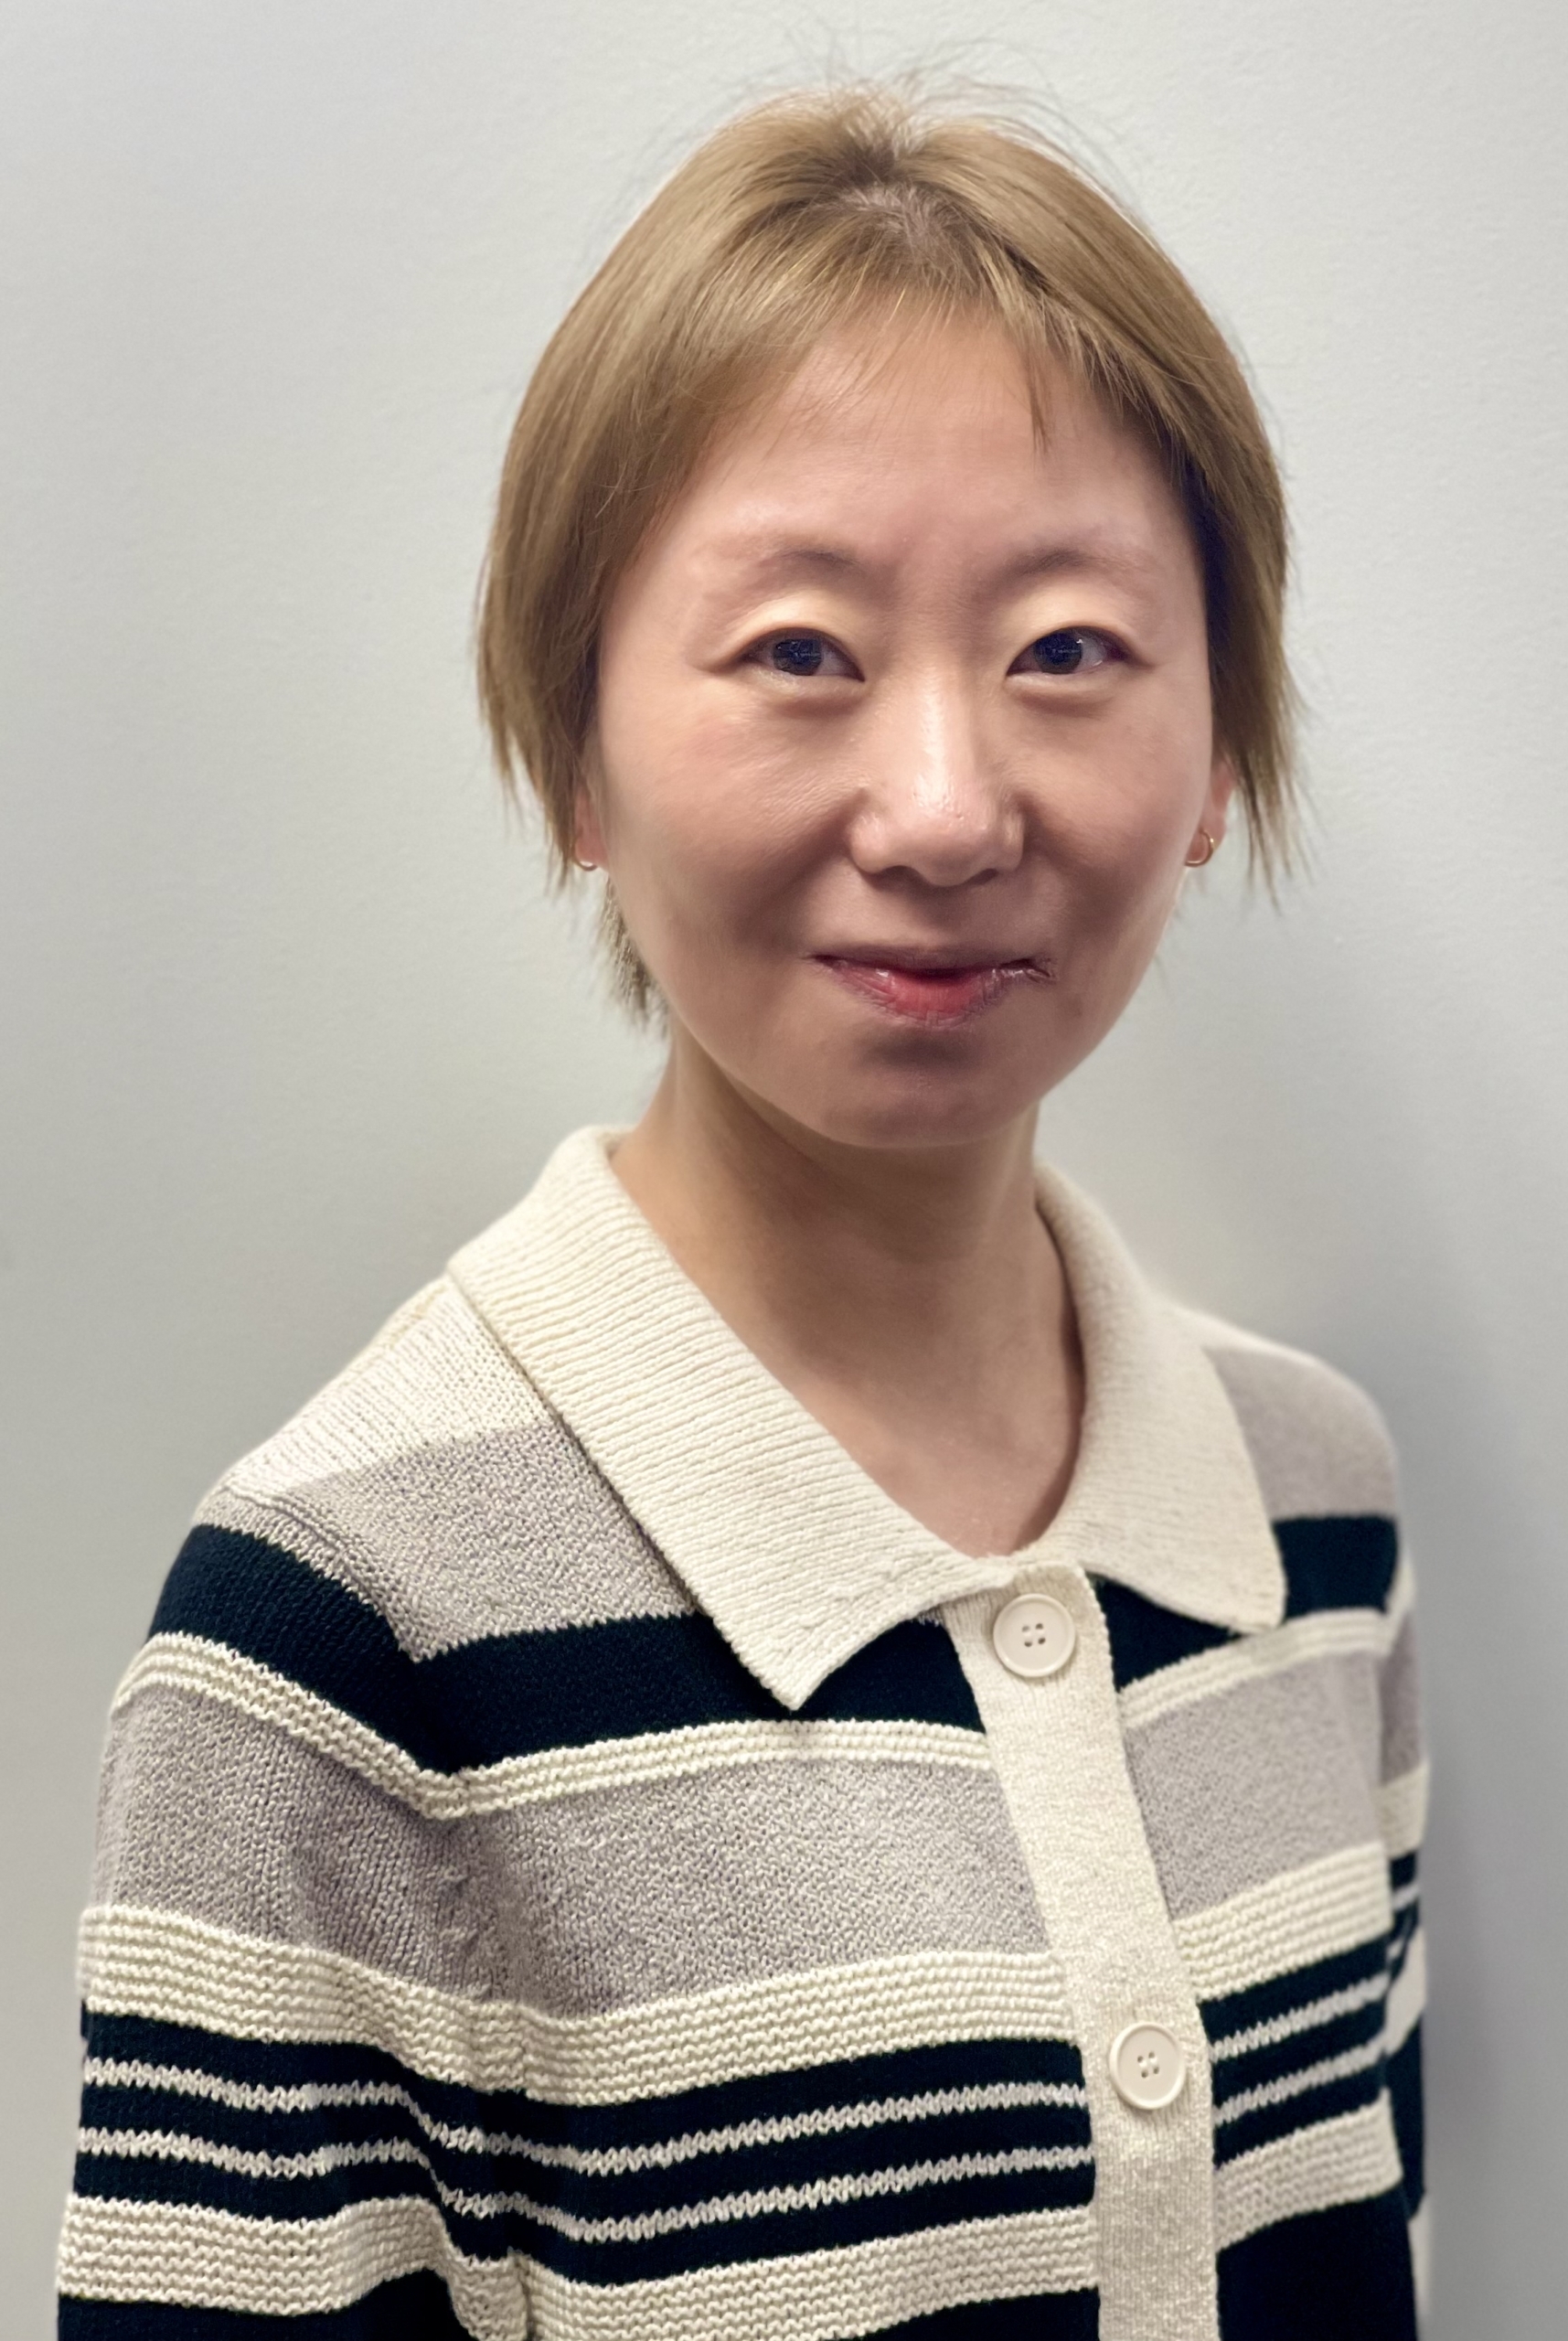 <strong><code>Dr Tracy (Xiaoying) Gao</code></strong><br />
Research Analyst<br />
BA<br />
MA (Education)<br />
PhD (Education)</p>
<p>